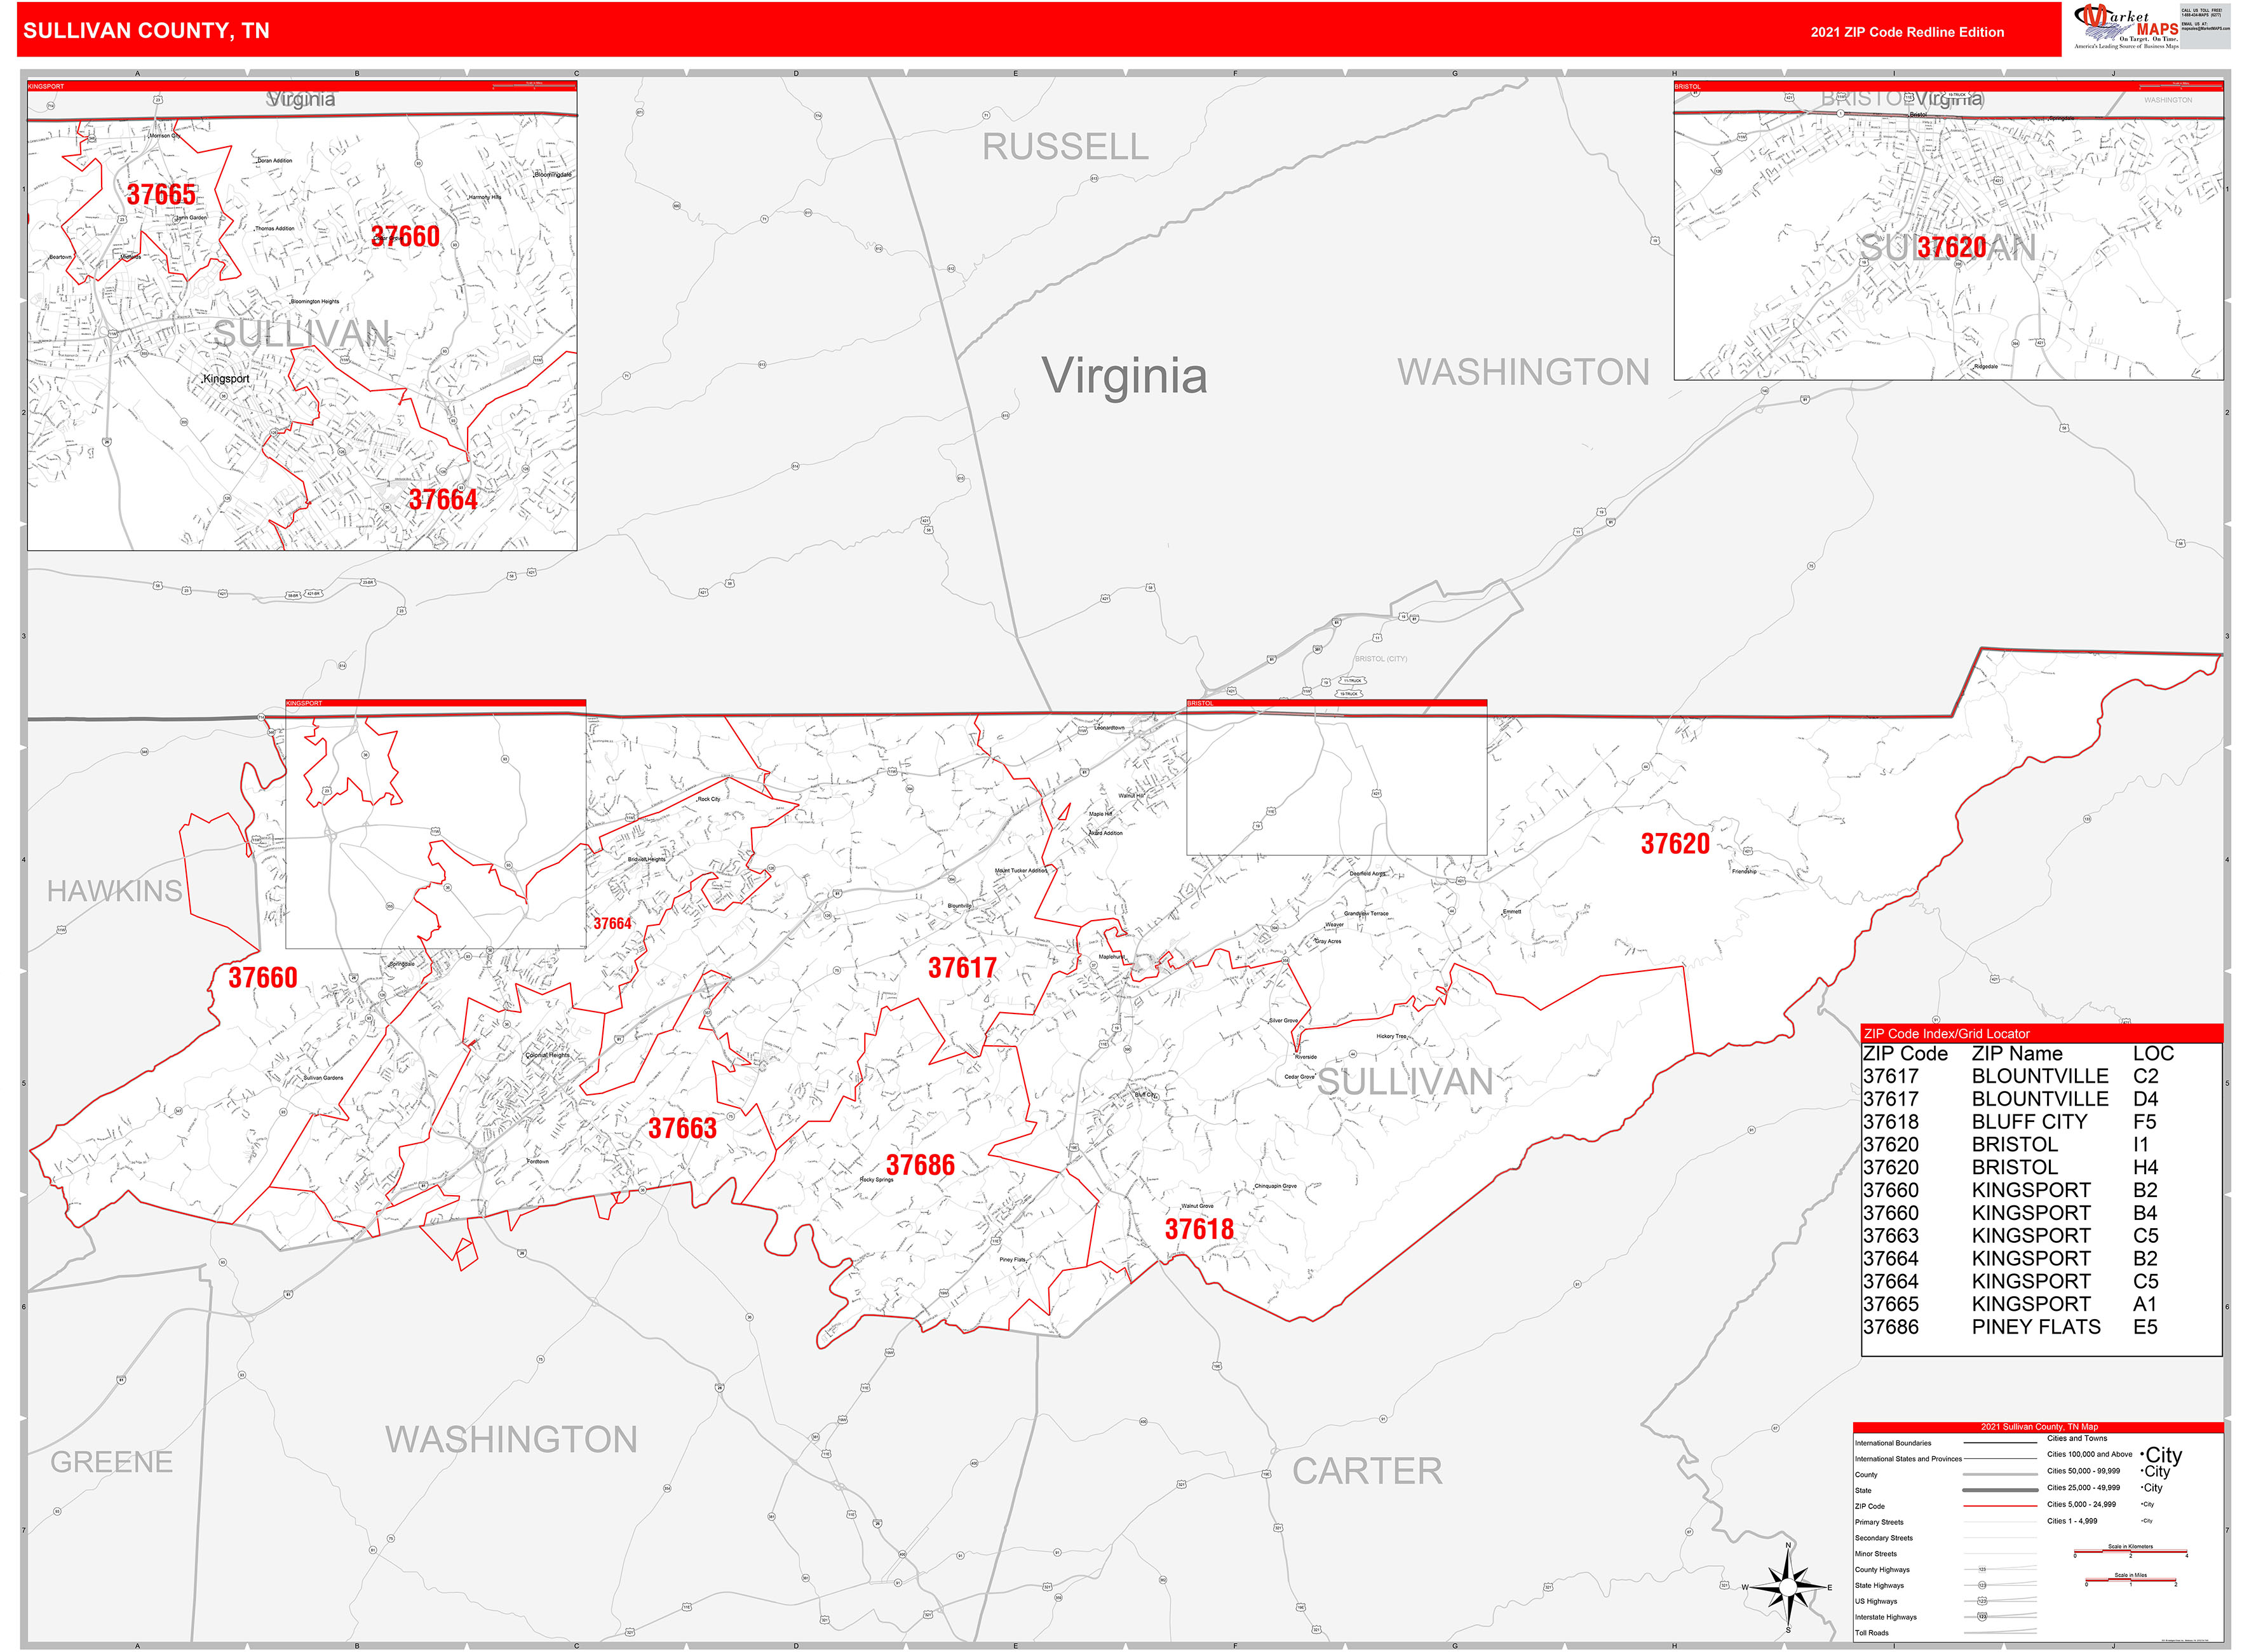 sullivan-county-tn-zip-code-wall-map-red-line-style-by-marketmaps